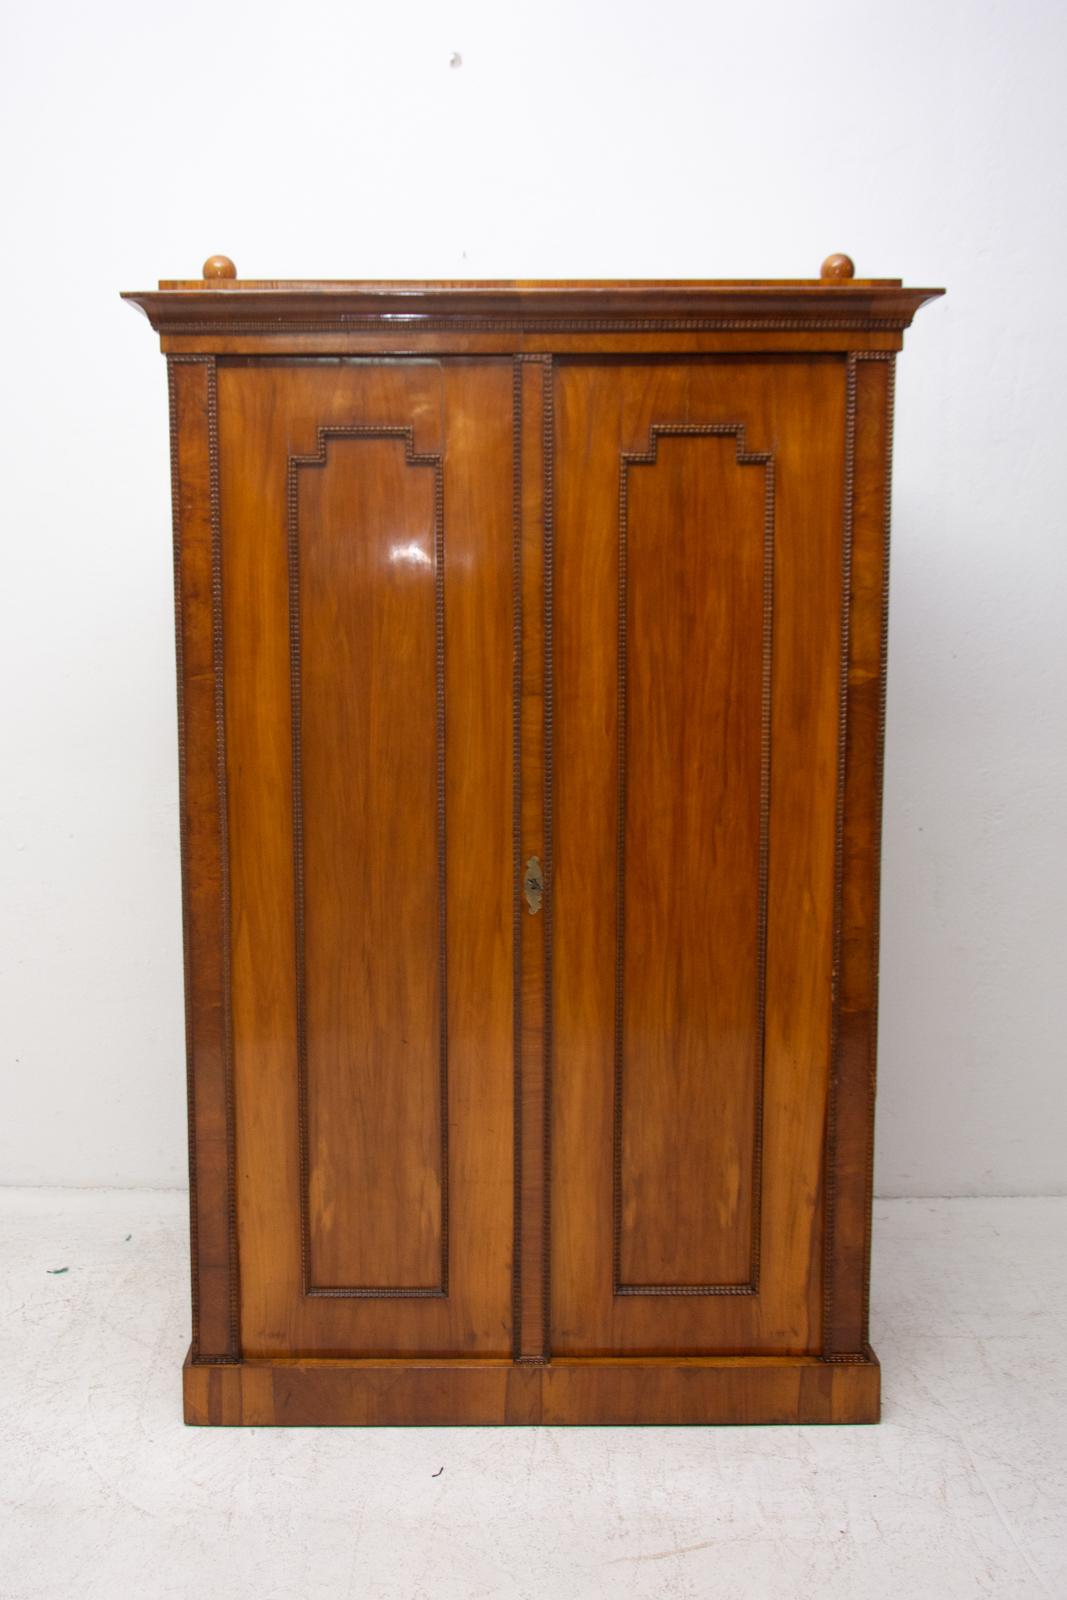 A shelf cabinet/ storage cabinet from the Biedermeier period, made in the 1830s and featuring a walnut veneer and decorative motifs typical for this period. This cabinet was professionally refurbished using shellac polish and remains fully